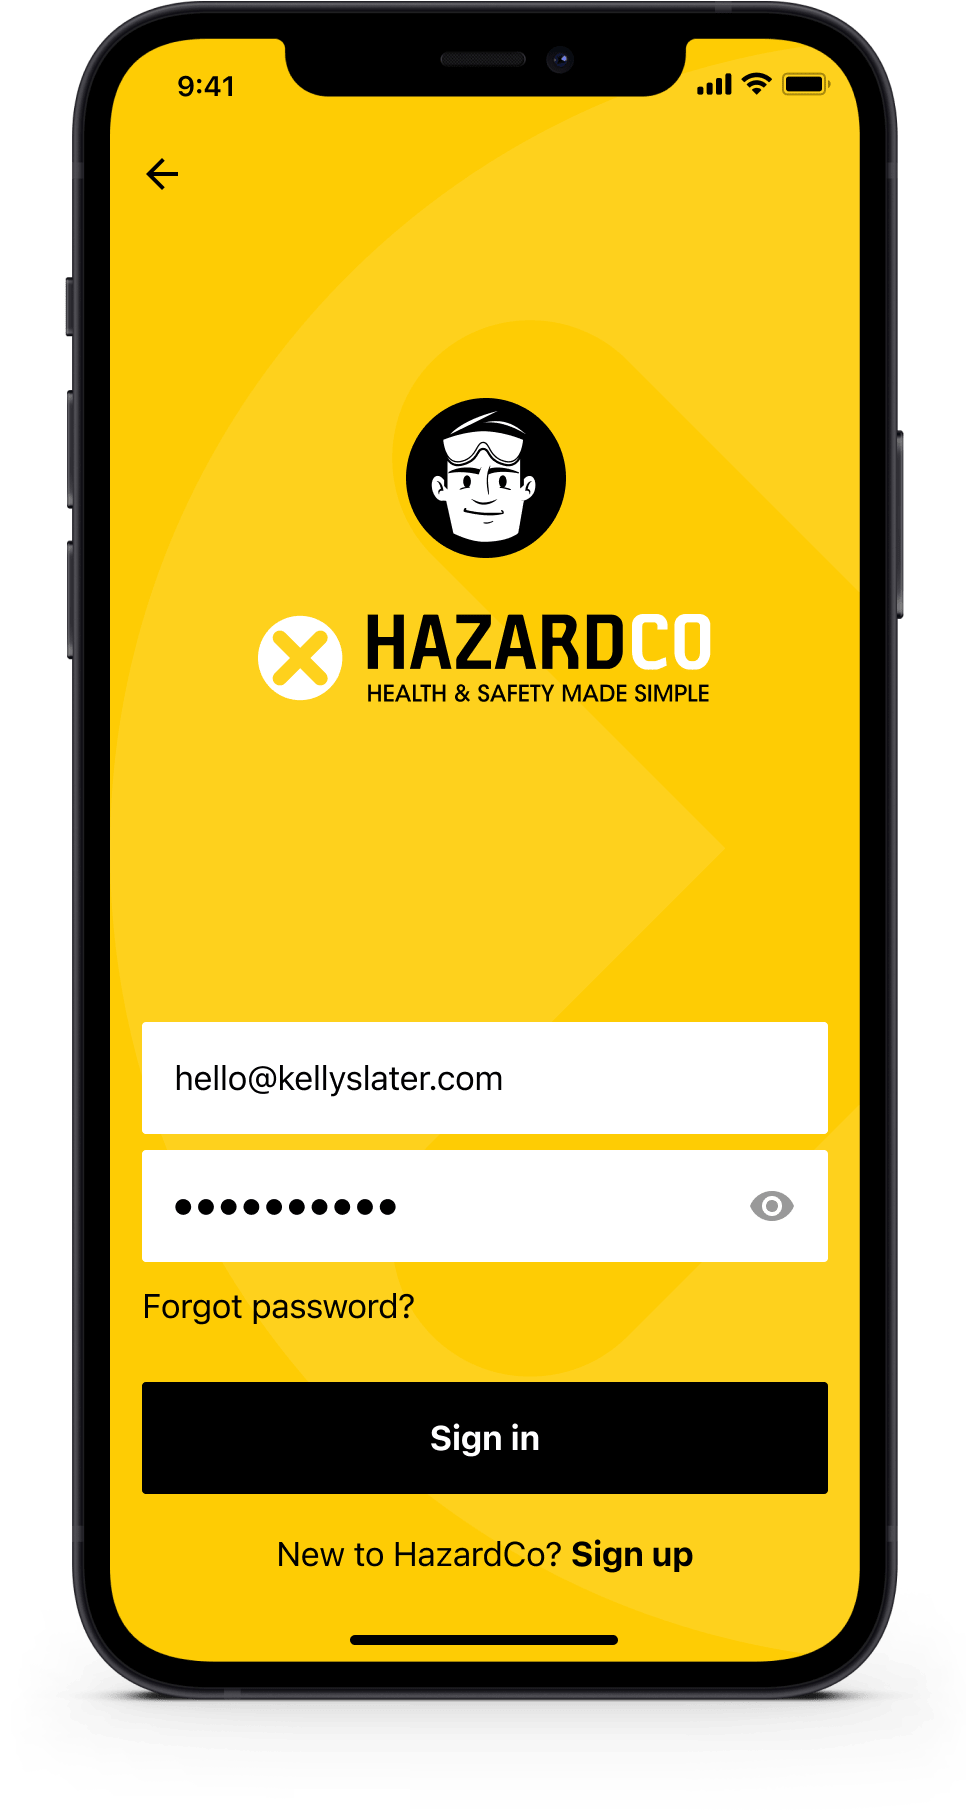 worksite health and safety app log in email password